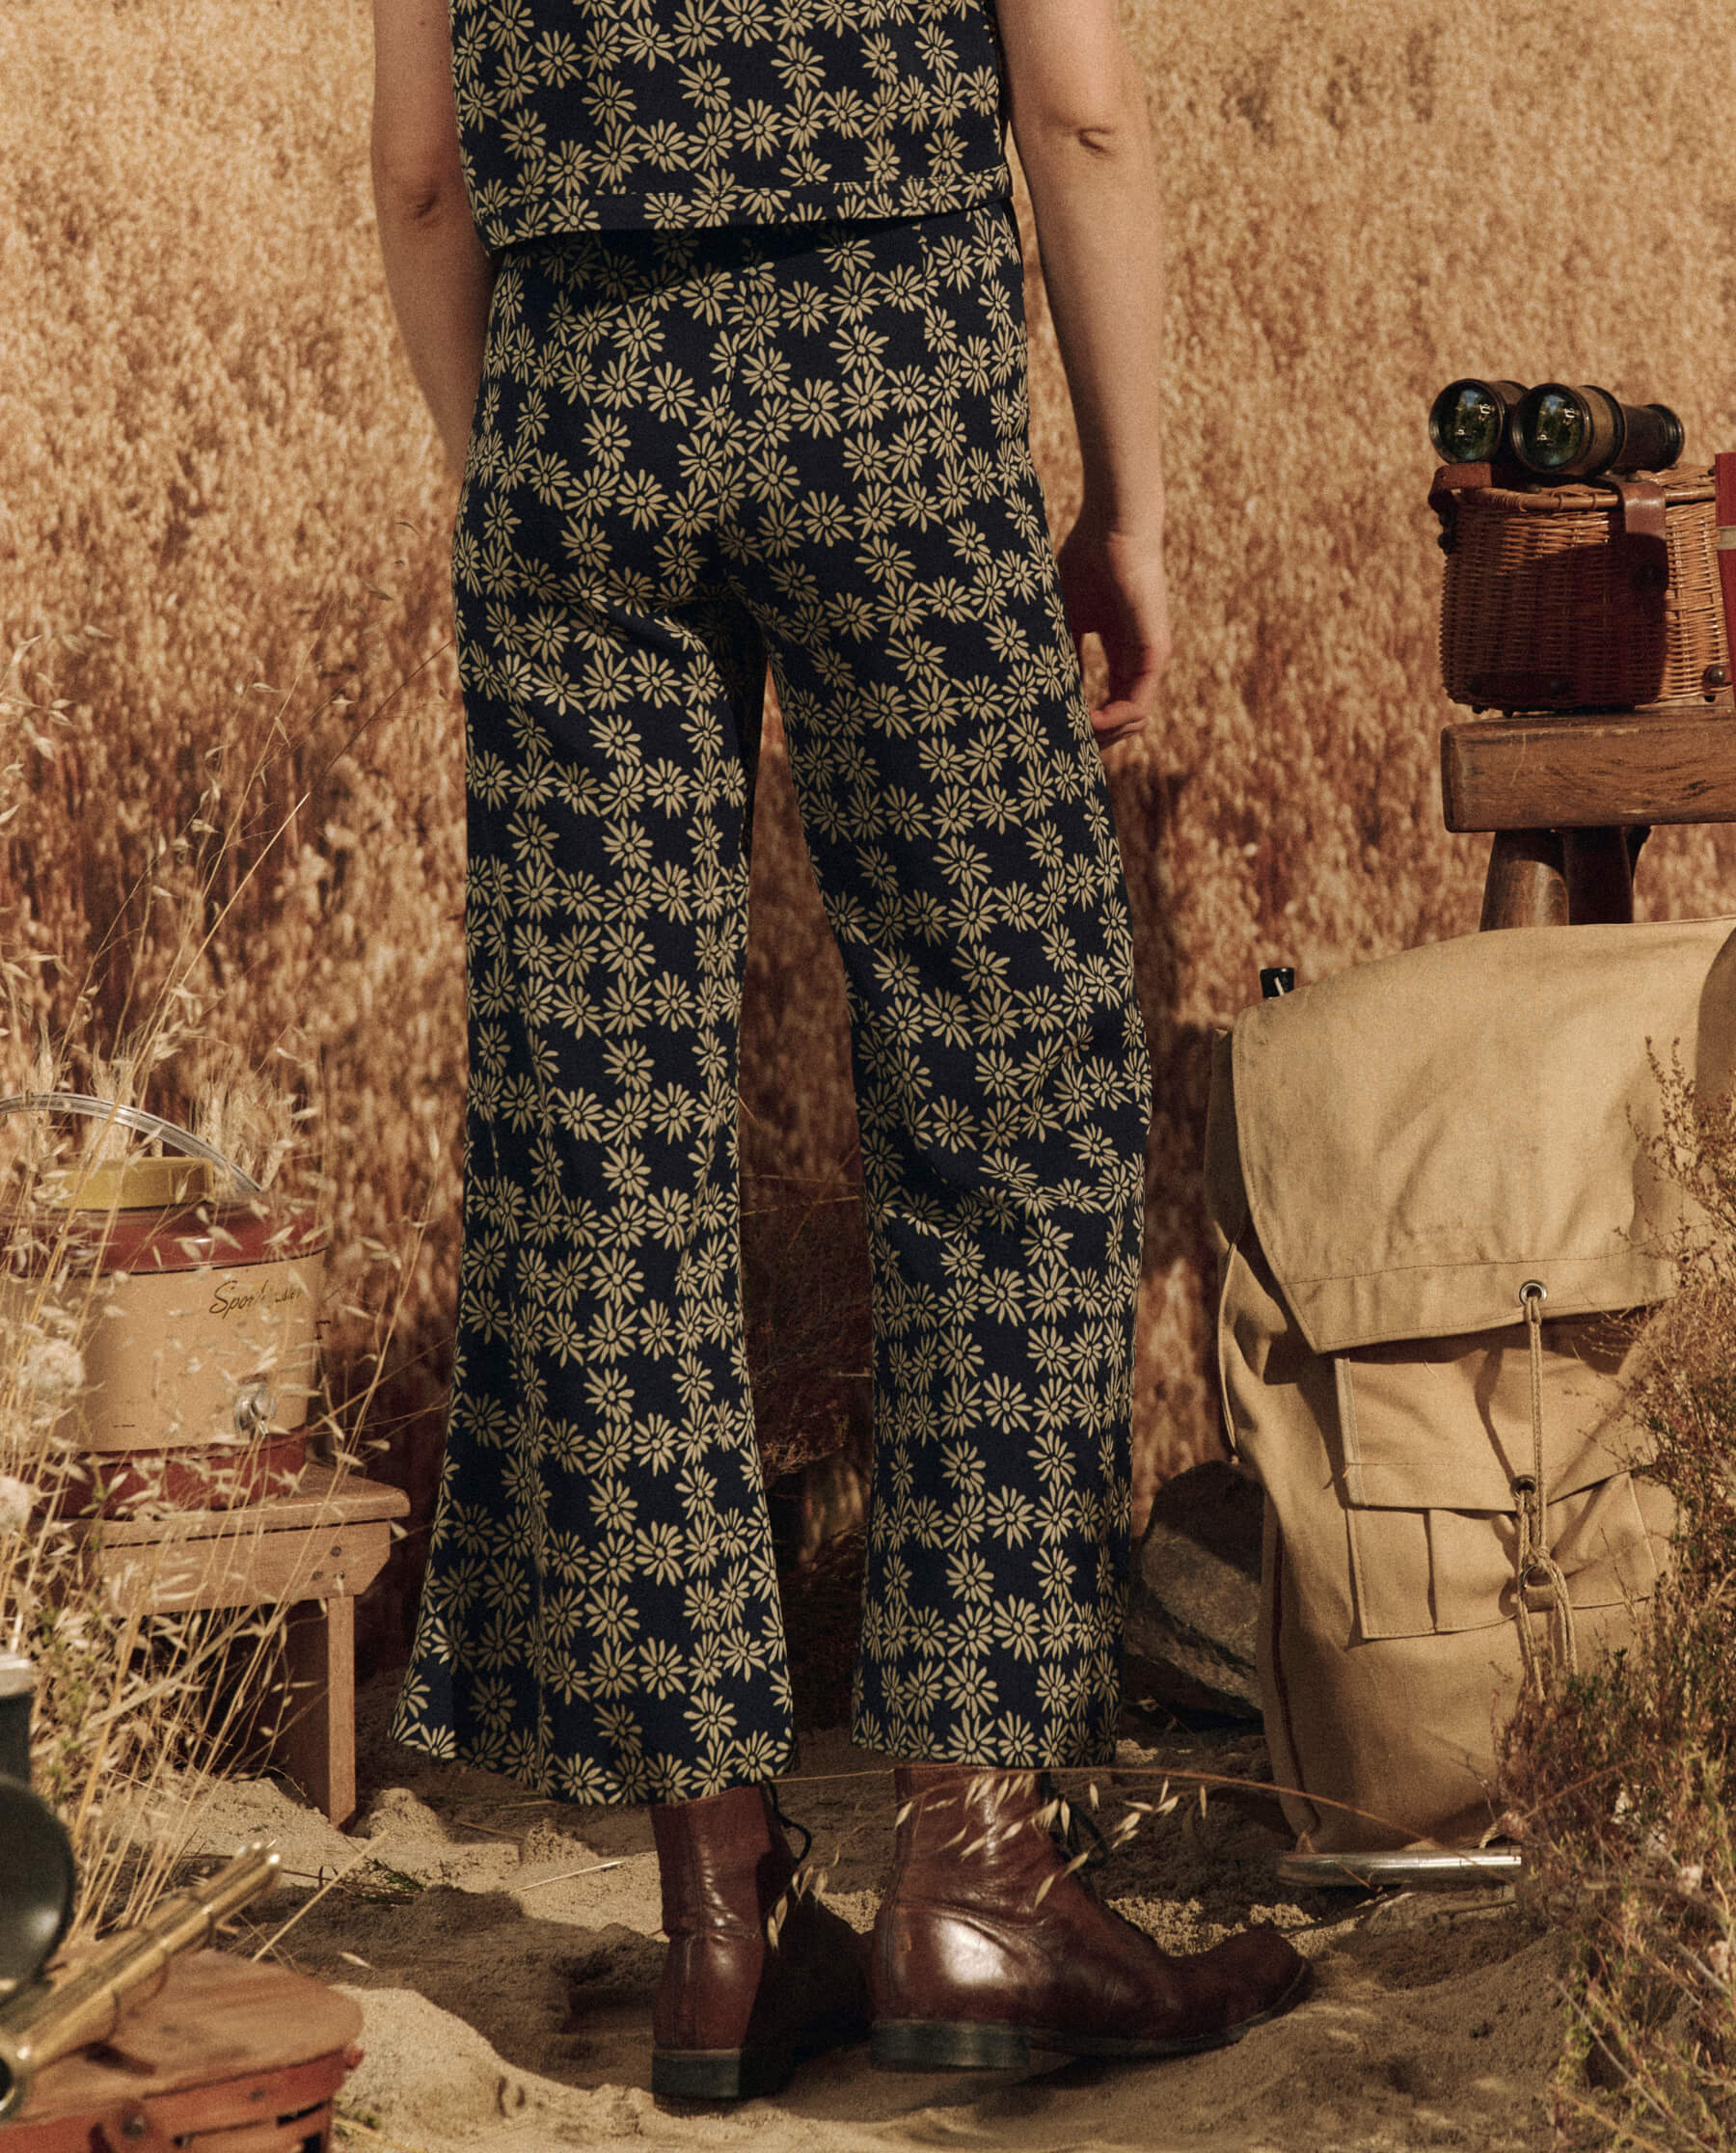 The Dance Pant. -- Navy Scattered Daisy